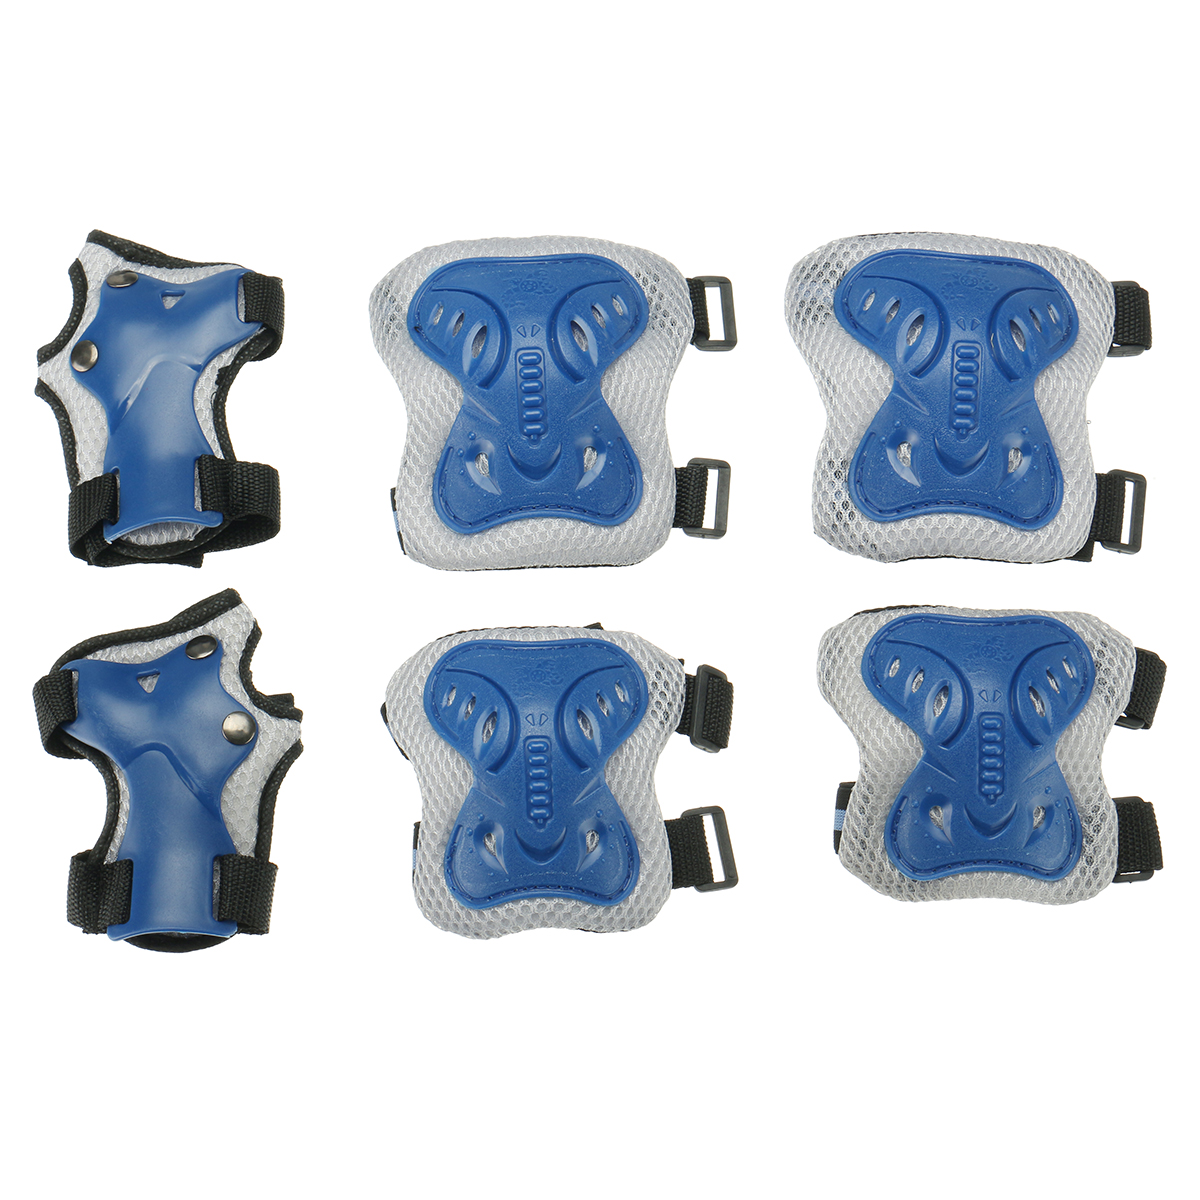 6PCS-Set-Adult-Children-KneeElbowWrist-Pads-Protective-Gears-for-Skateboard-Bicycle-Ice-Inline-Rolle-1796809-5